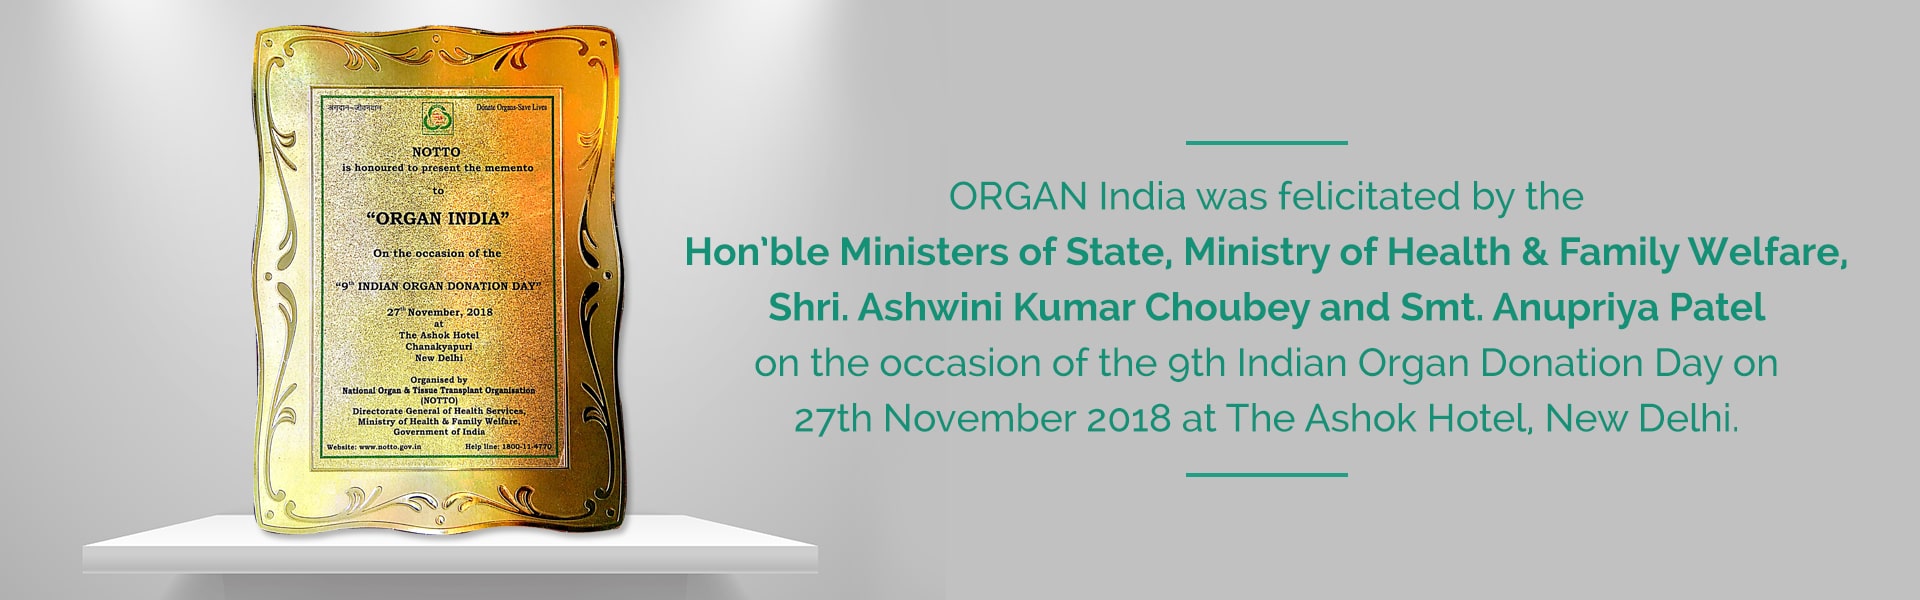 ORGAN India was facilitated on the occasion of Organ Donation day